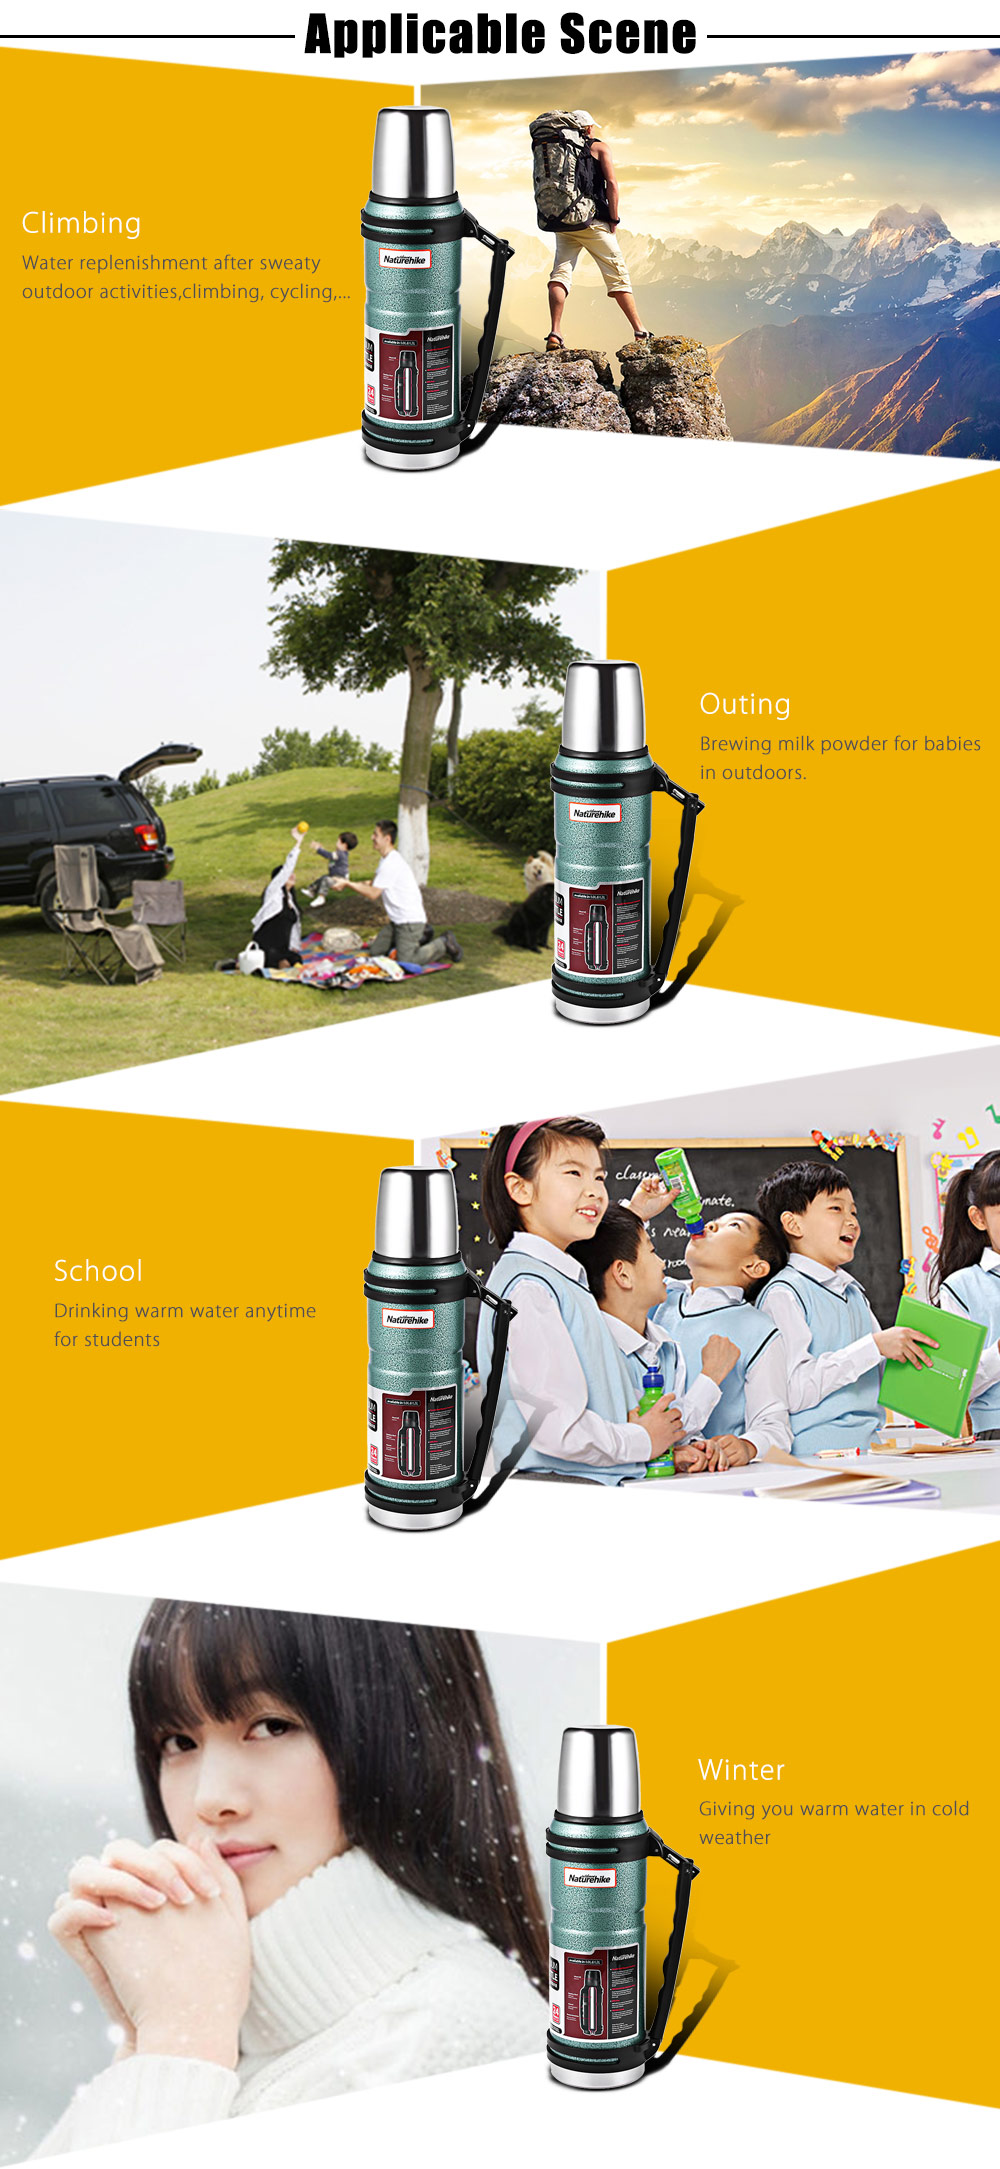 Naturehike 1L Outdoor Stainless Steel Vacuum Thermal Water Bottle Camping Flask Travel Cup